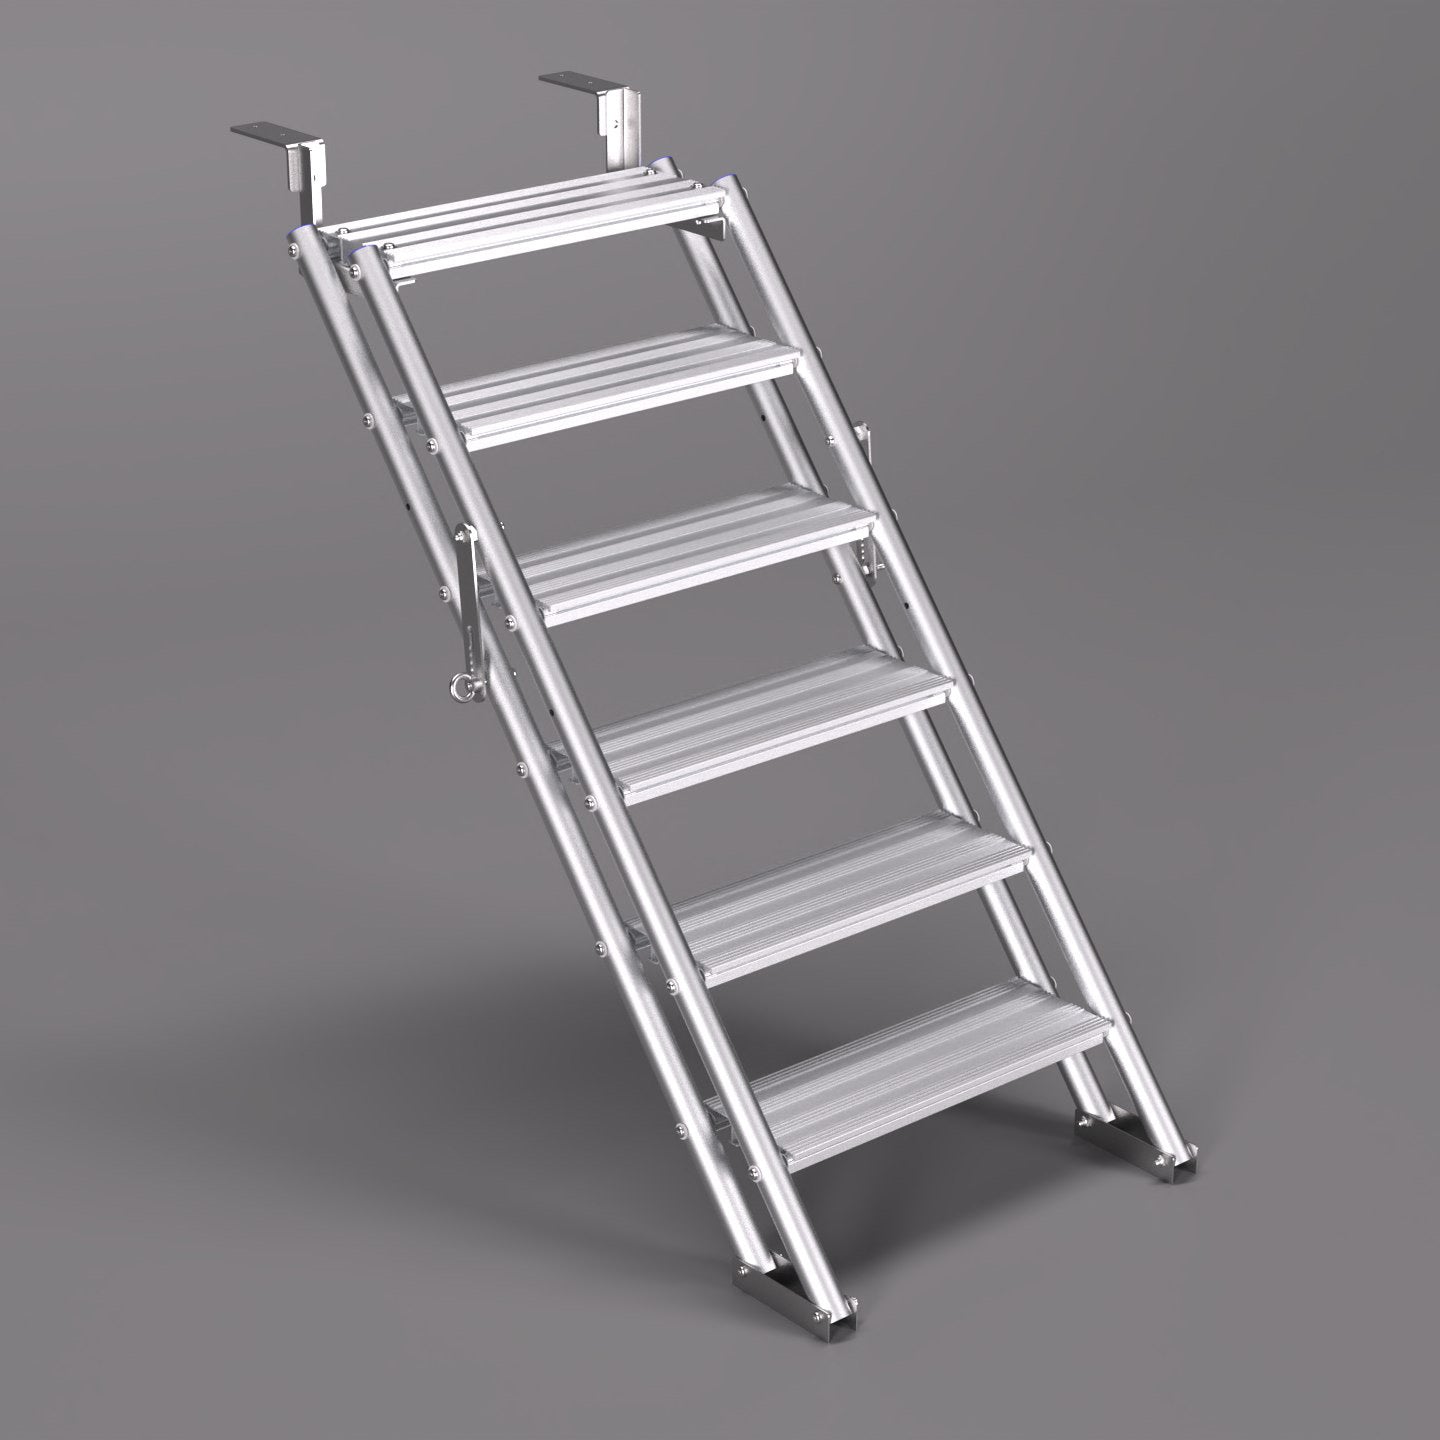 An image of a 1.5m ALTO Universal Stair Unit with the flat slab fixing option.